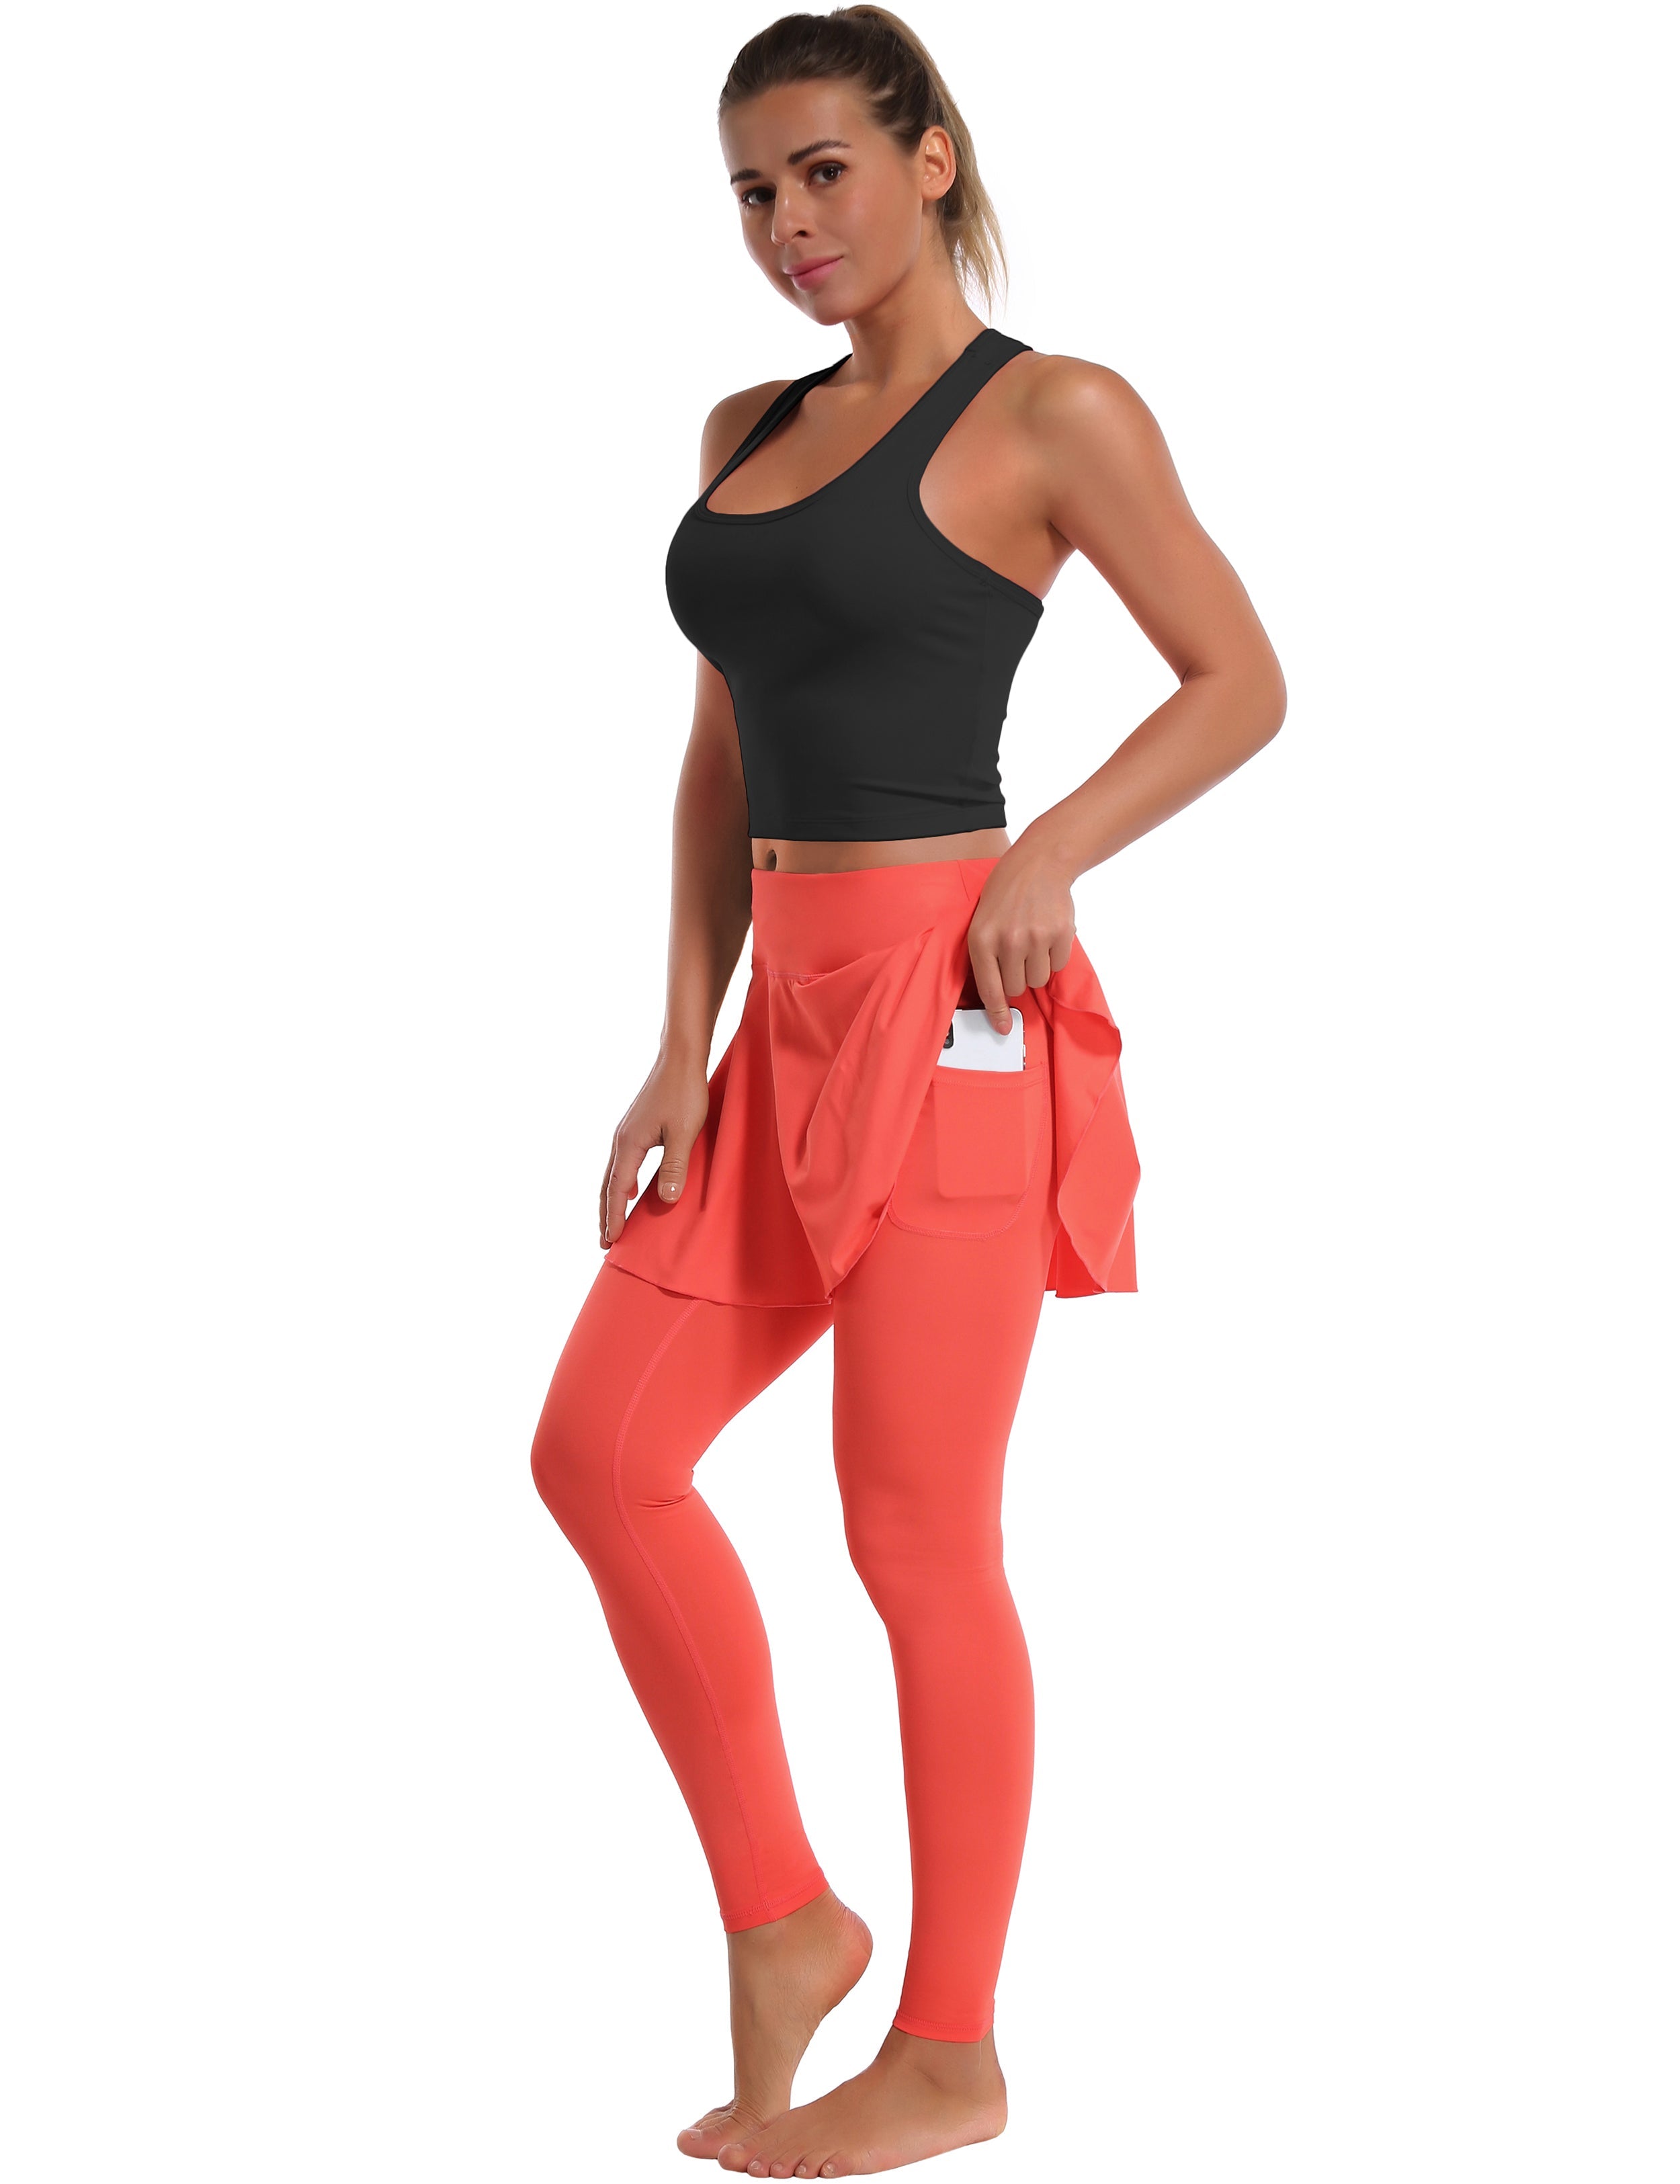 Athletic Tennis Golf Skort with Pocket Shorts coral 80%Nylon/20%Spandex UPF 50+ sun protection Elastic closure Lightweight, Wrinkle Moisture wicking Quick drying Secure & comfortable two layer Hidden pocket